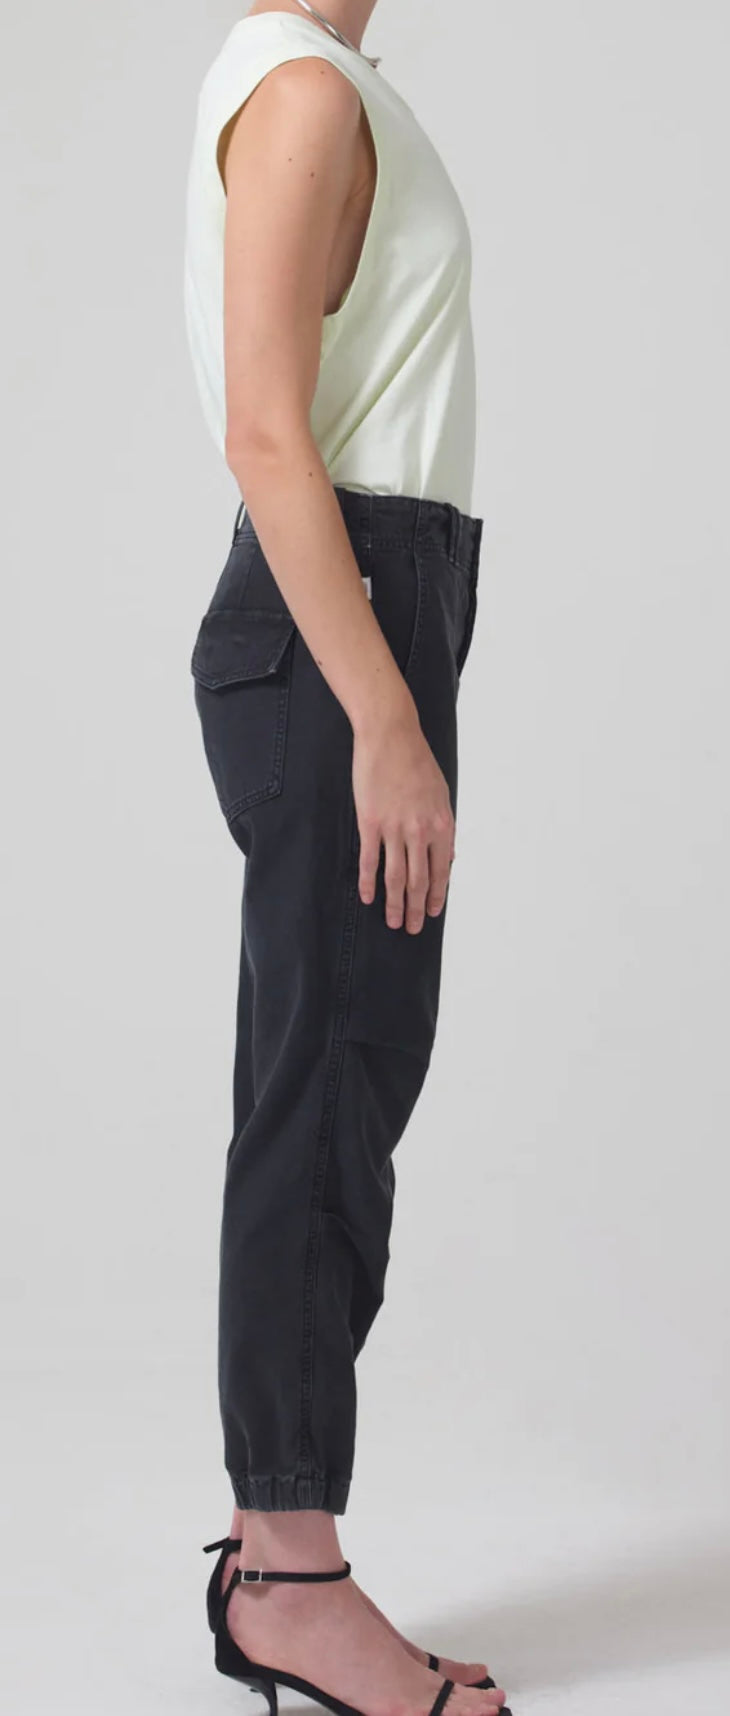 AGNI UTILITY TROUSER IN WASHED BLACK